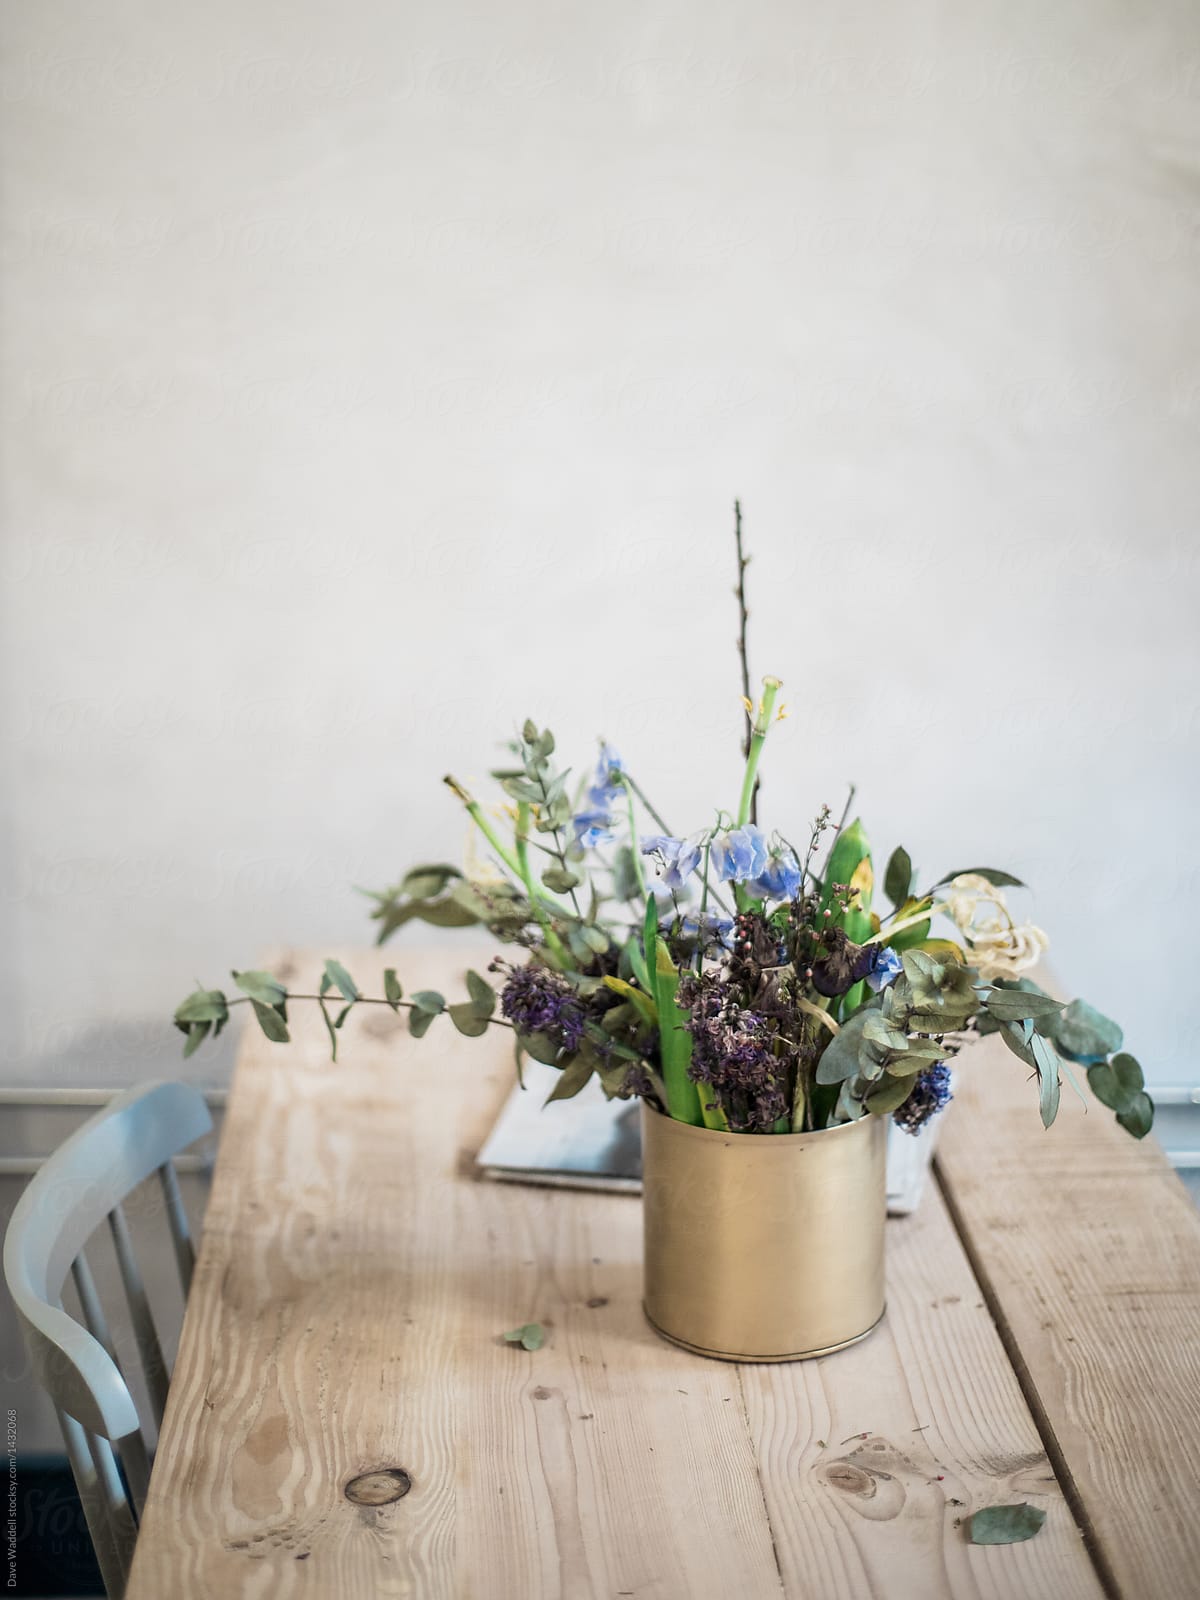 A vase of flowers sits on a rustic wood kitchen table.